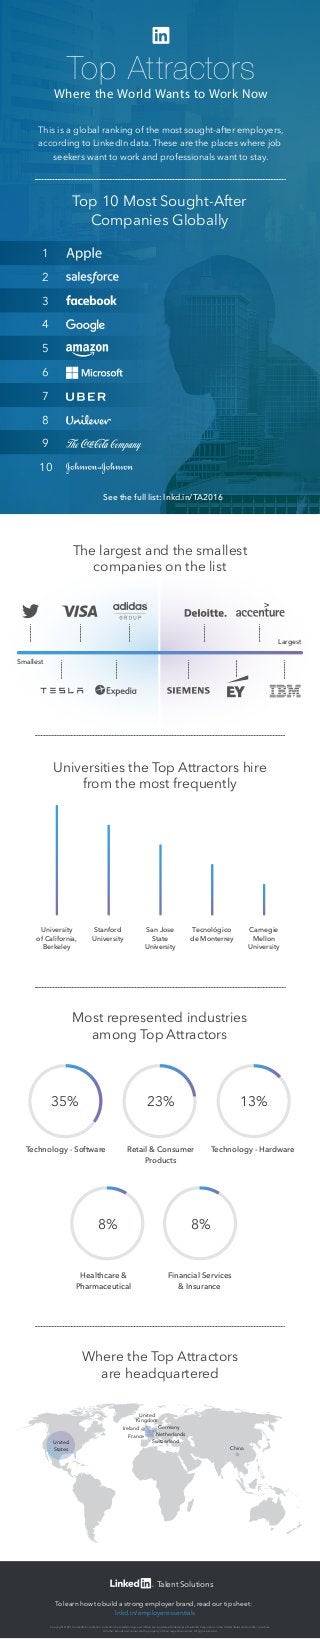 This is a global ranking of the most sought-after employers,
according to LinkedIn data. These are the places where job
seekers want to work and professionals want to stay.
1
2
3
4
5
6
7
8
9
10
Top 10 Most Sought-After
Companies Globally
See the full list: lnkd.in/TA2016
Top Attractors
Where the World Wants to Work Now
The largest and the smallest
companies on the list
Universities the Top Attractors hire
from the most frequently
Largest
Smallest
University
of California,
Berkeley
Technology - Software Retail & Consumer
Products
Healthcare &
Pharmaceutical
Financial Services
& Insurance
Technology - Hardware
Stanford
University
San Jose
State
University
Tecnológico
de Monterrey
Carnegie
Mellon
University
Most represented industries
among Top Attractors
Where the Top Attractors
are headquartered
35%
8%8%
23% 13%
United
States
United
Kingdom
NetherlandsFrance
Germany
Switzerland
China
Ireland
Talent Solutions
To learn how to build a strong employer brand, read our tip sheet:
lnkd.in/employeressentials
Copyright © 2016 LinkedIn Corporation. LinkedIn, the LinkedIn logo, and InMail, are registered trademarks of LinkedIn Corporation in the United States and/or other countries.
All other brands and names are the property of their respective owners. All rights reserved.
 